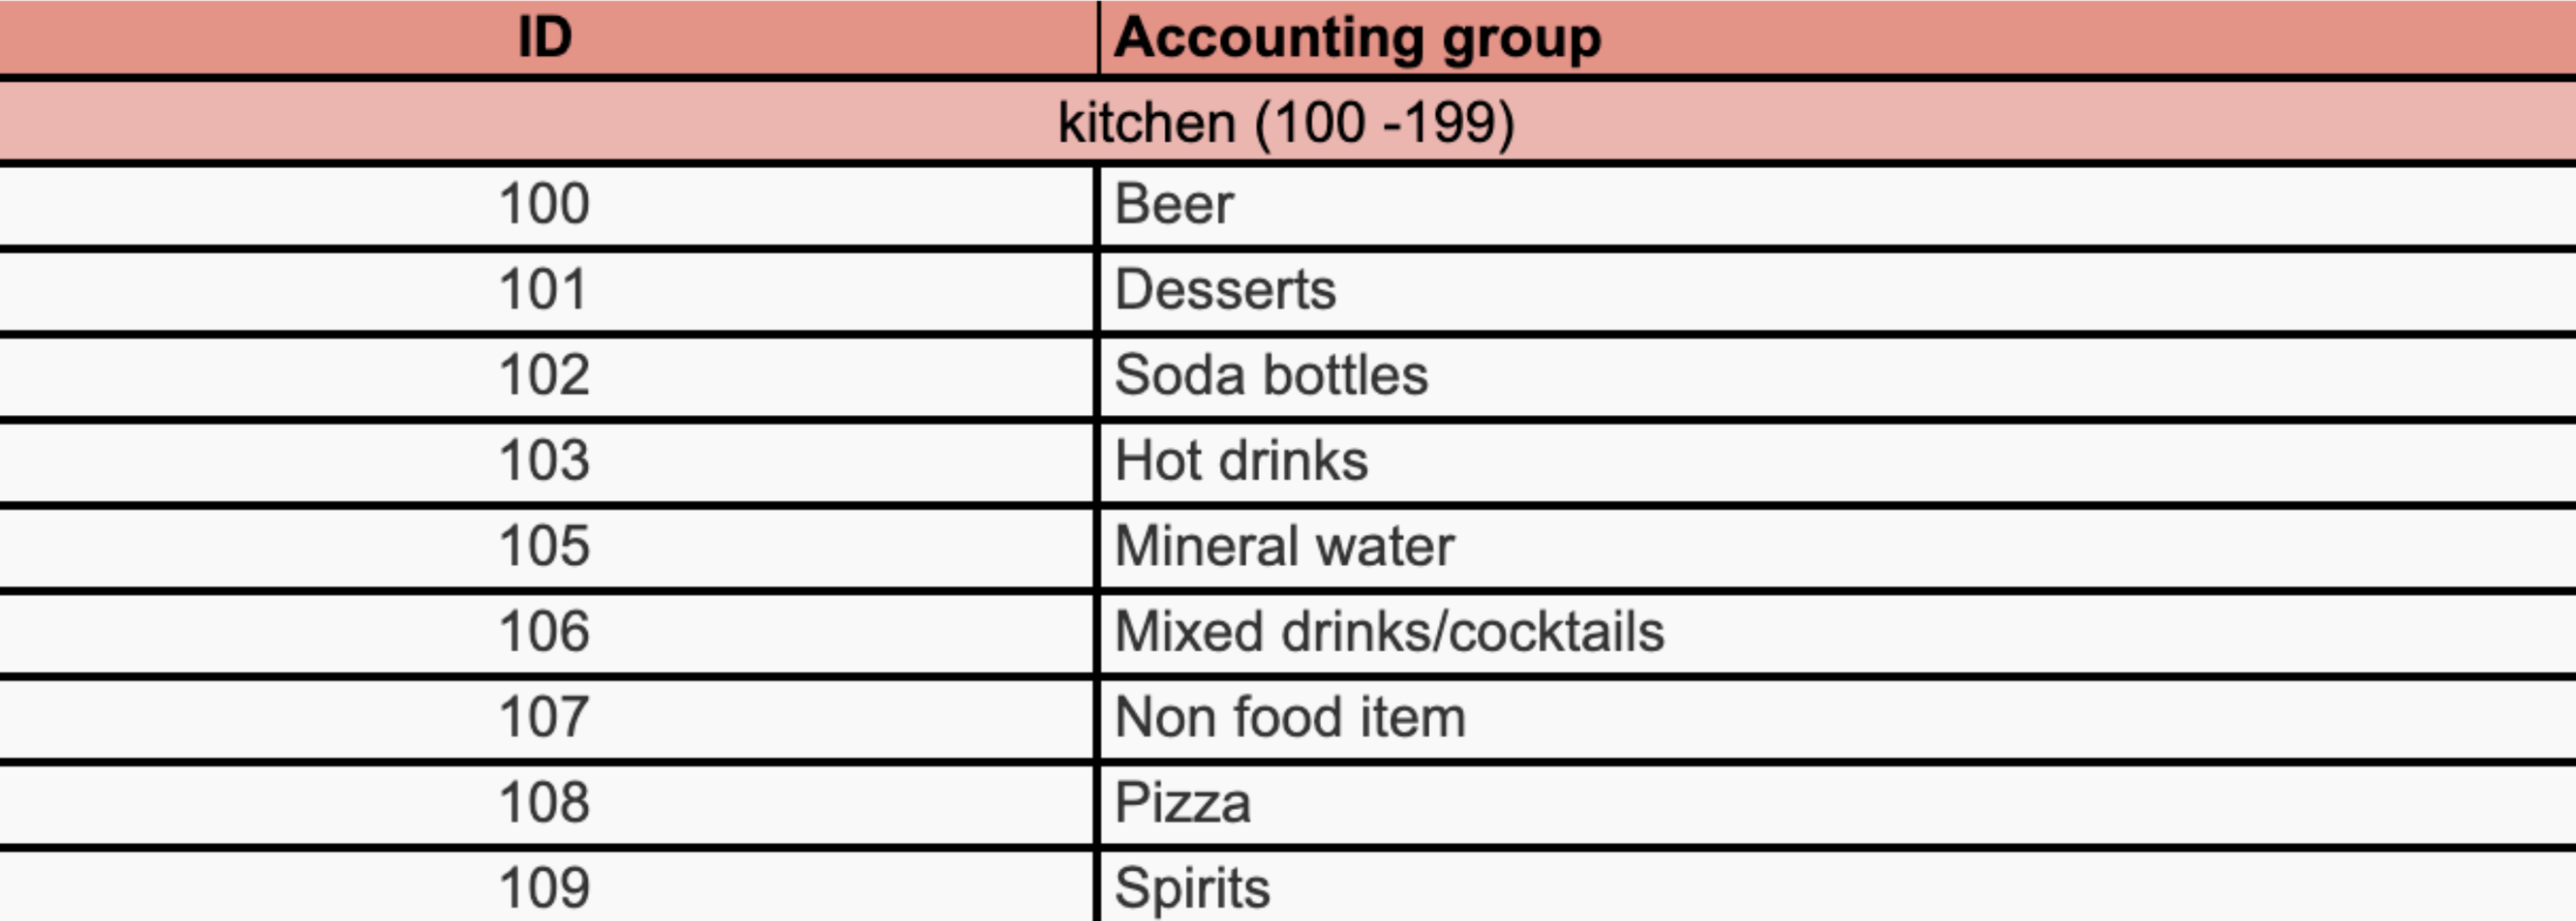 Two column table indicating ID and Accounting groups